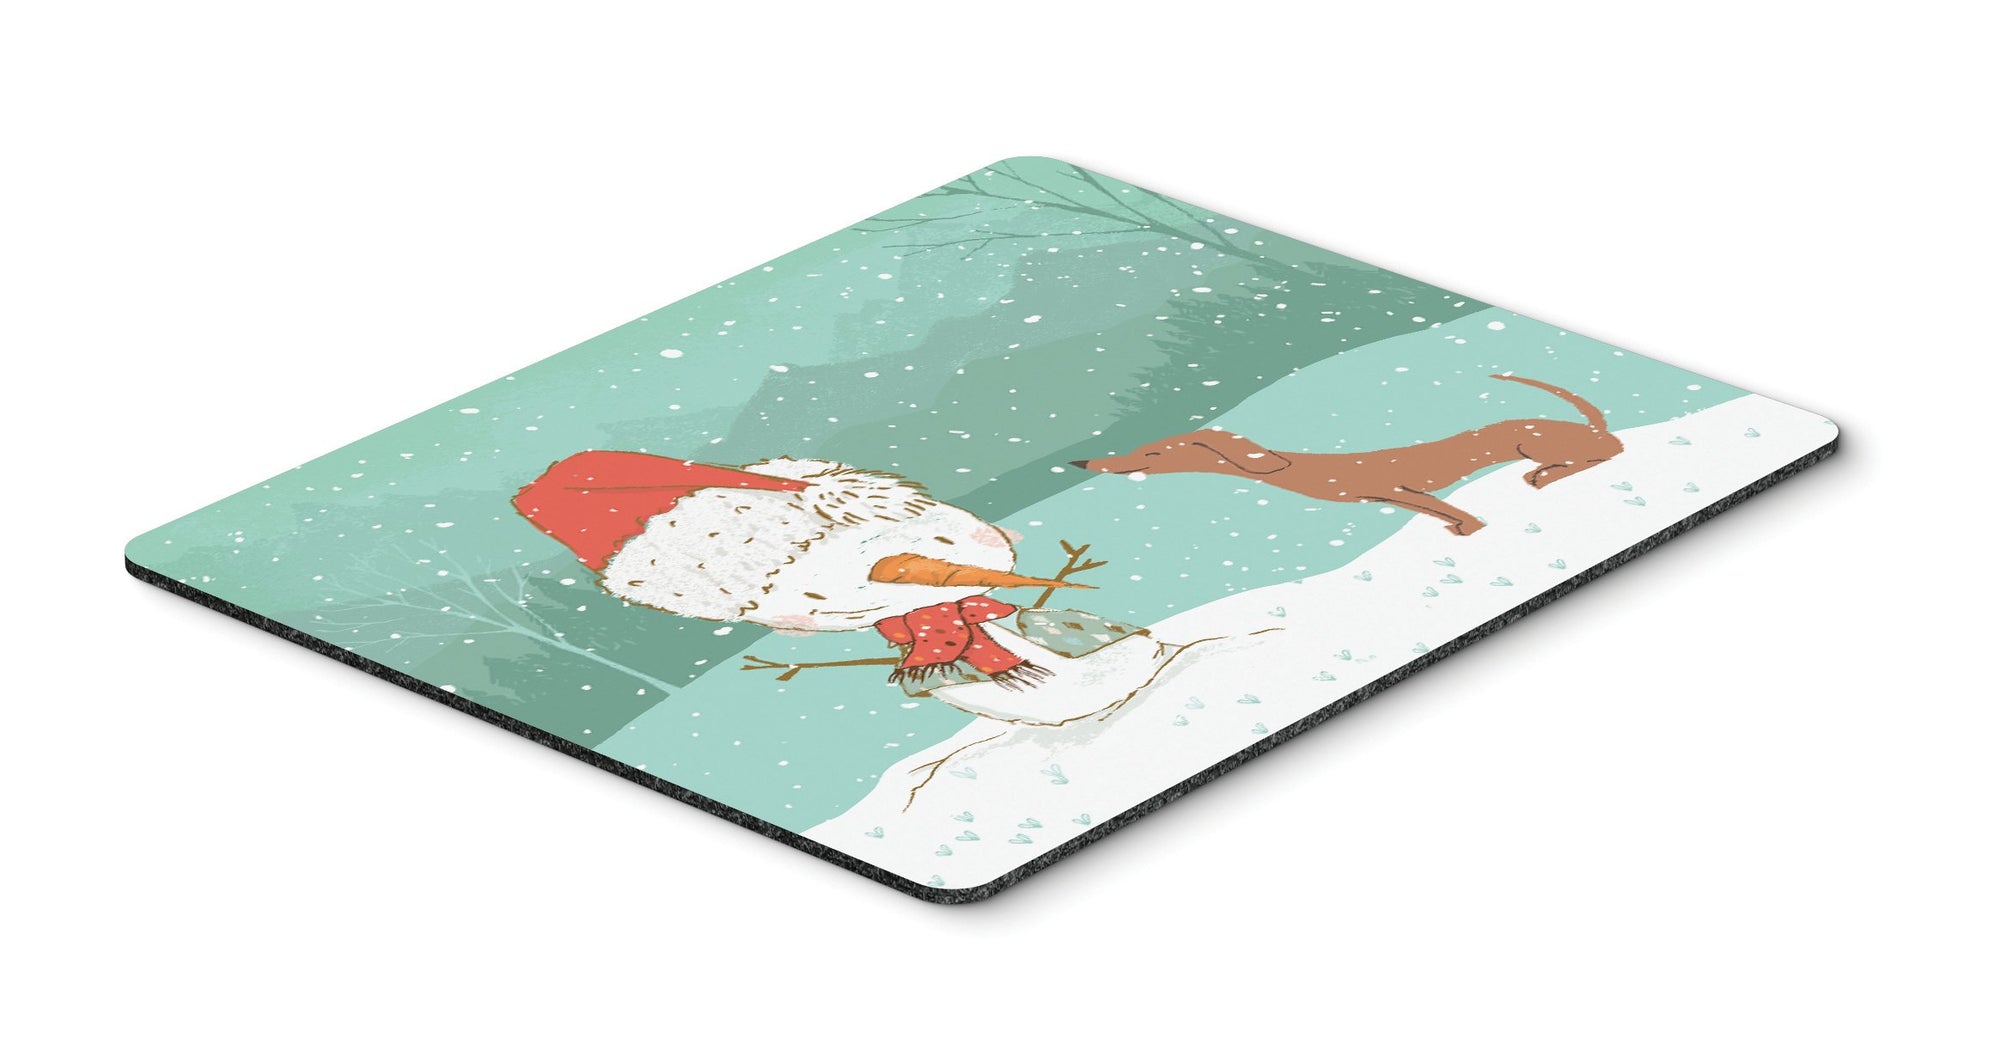 Red Dachshund Snowman Christmas Mouse Pad, Hot Pad or Trivet CK2084MP by Caroline's Treasures